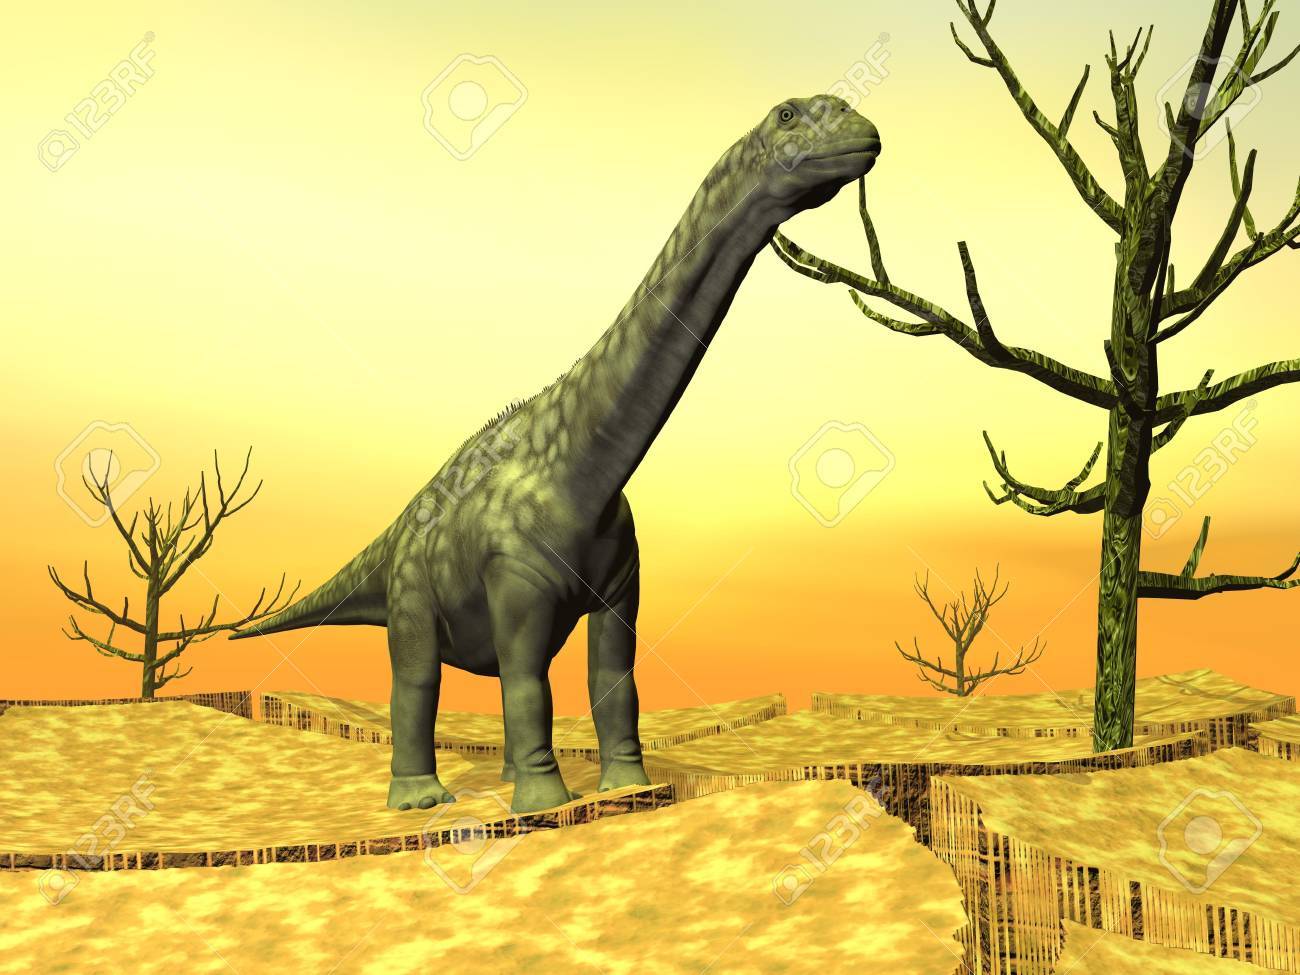 16250688-argentinosaurus-dinosaur-standing-on-the-cracked-desert-ground-next-to-dead-trees-by-hot-weather.jpg